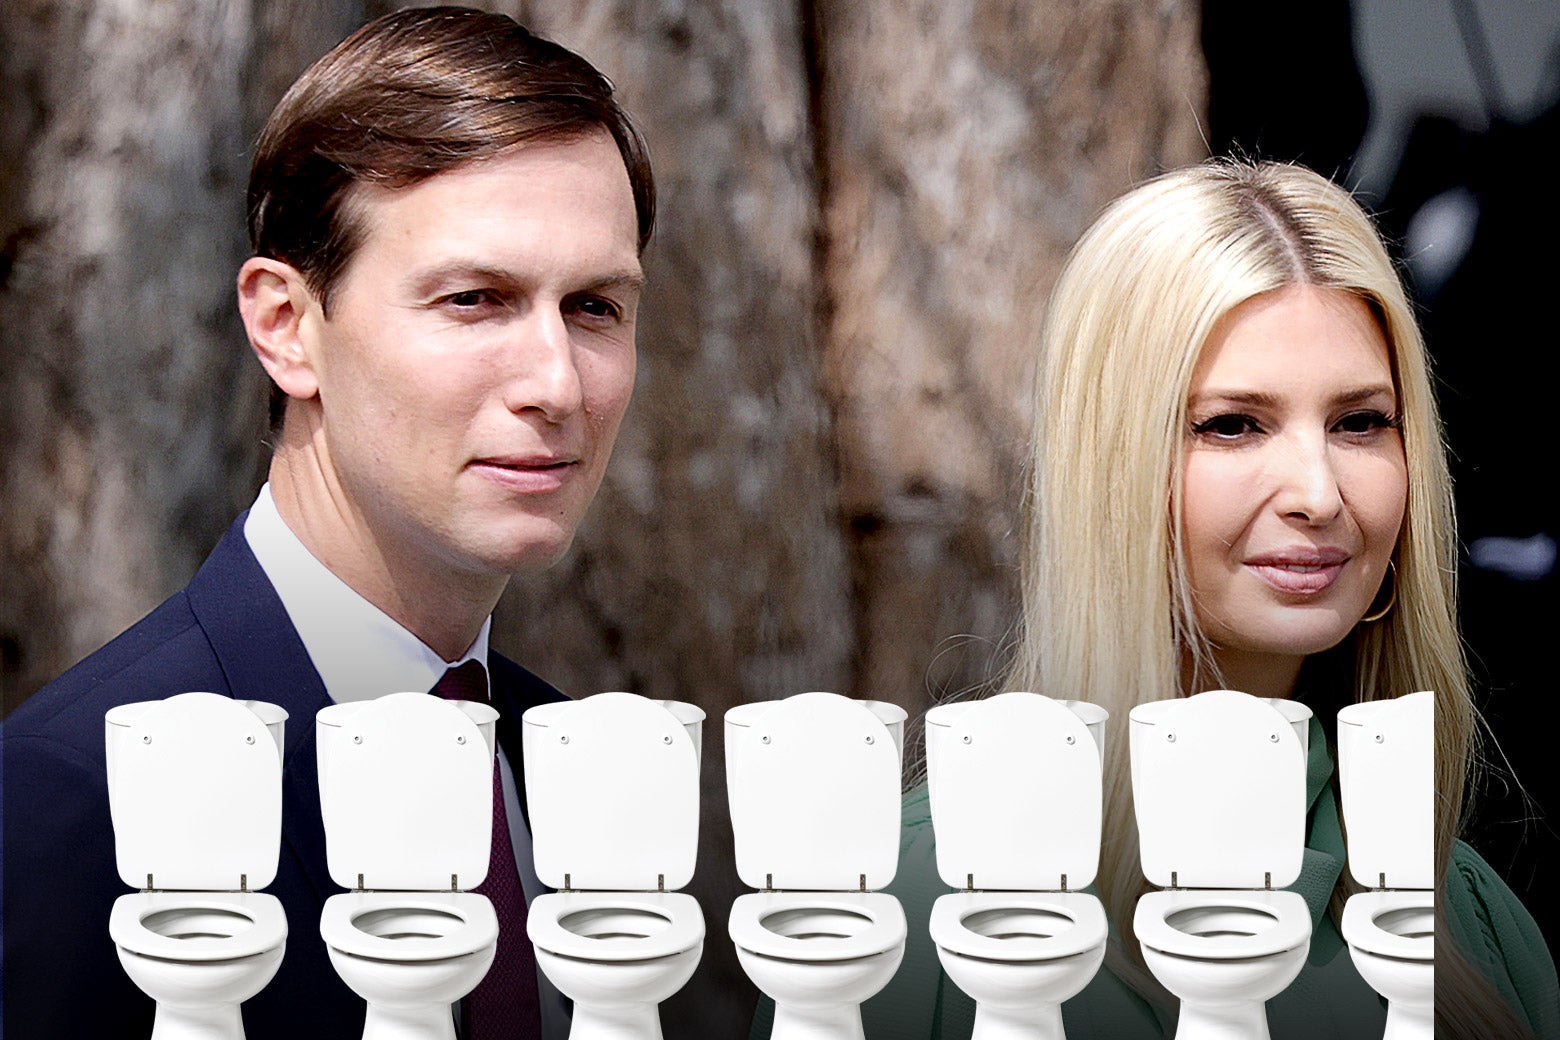 Kushner and Trump are pictured side by side above a row of 6.5 toilet icons.